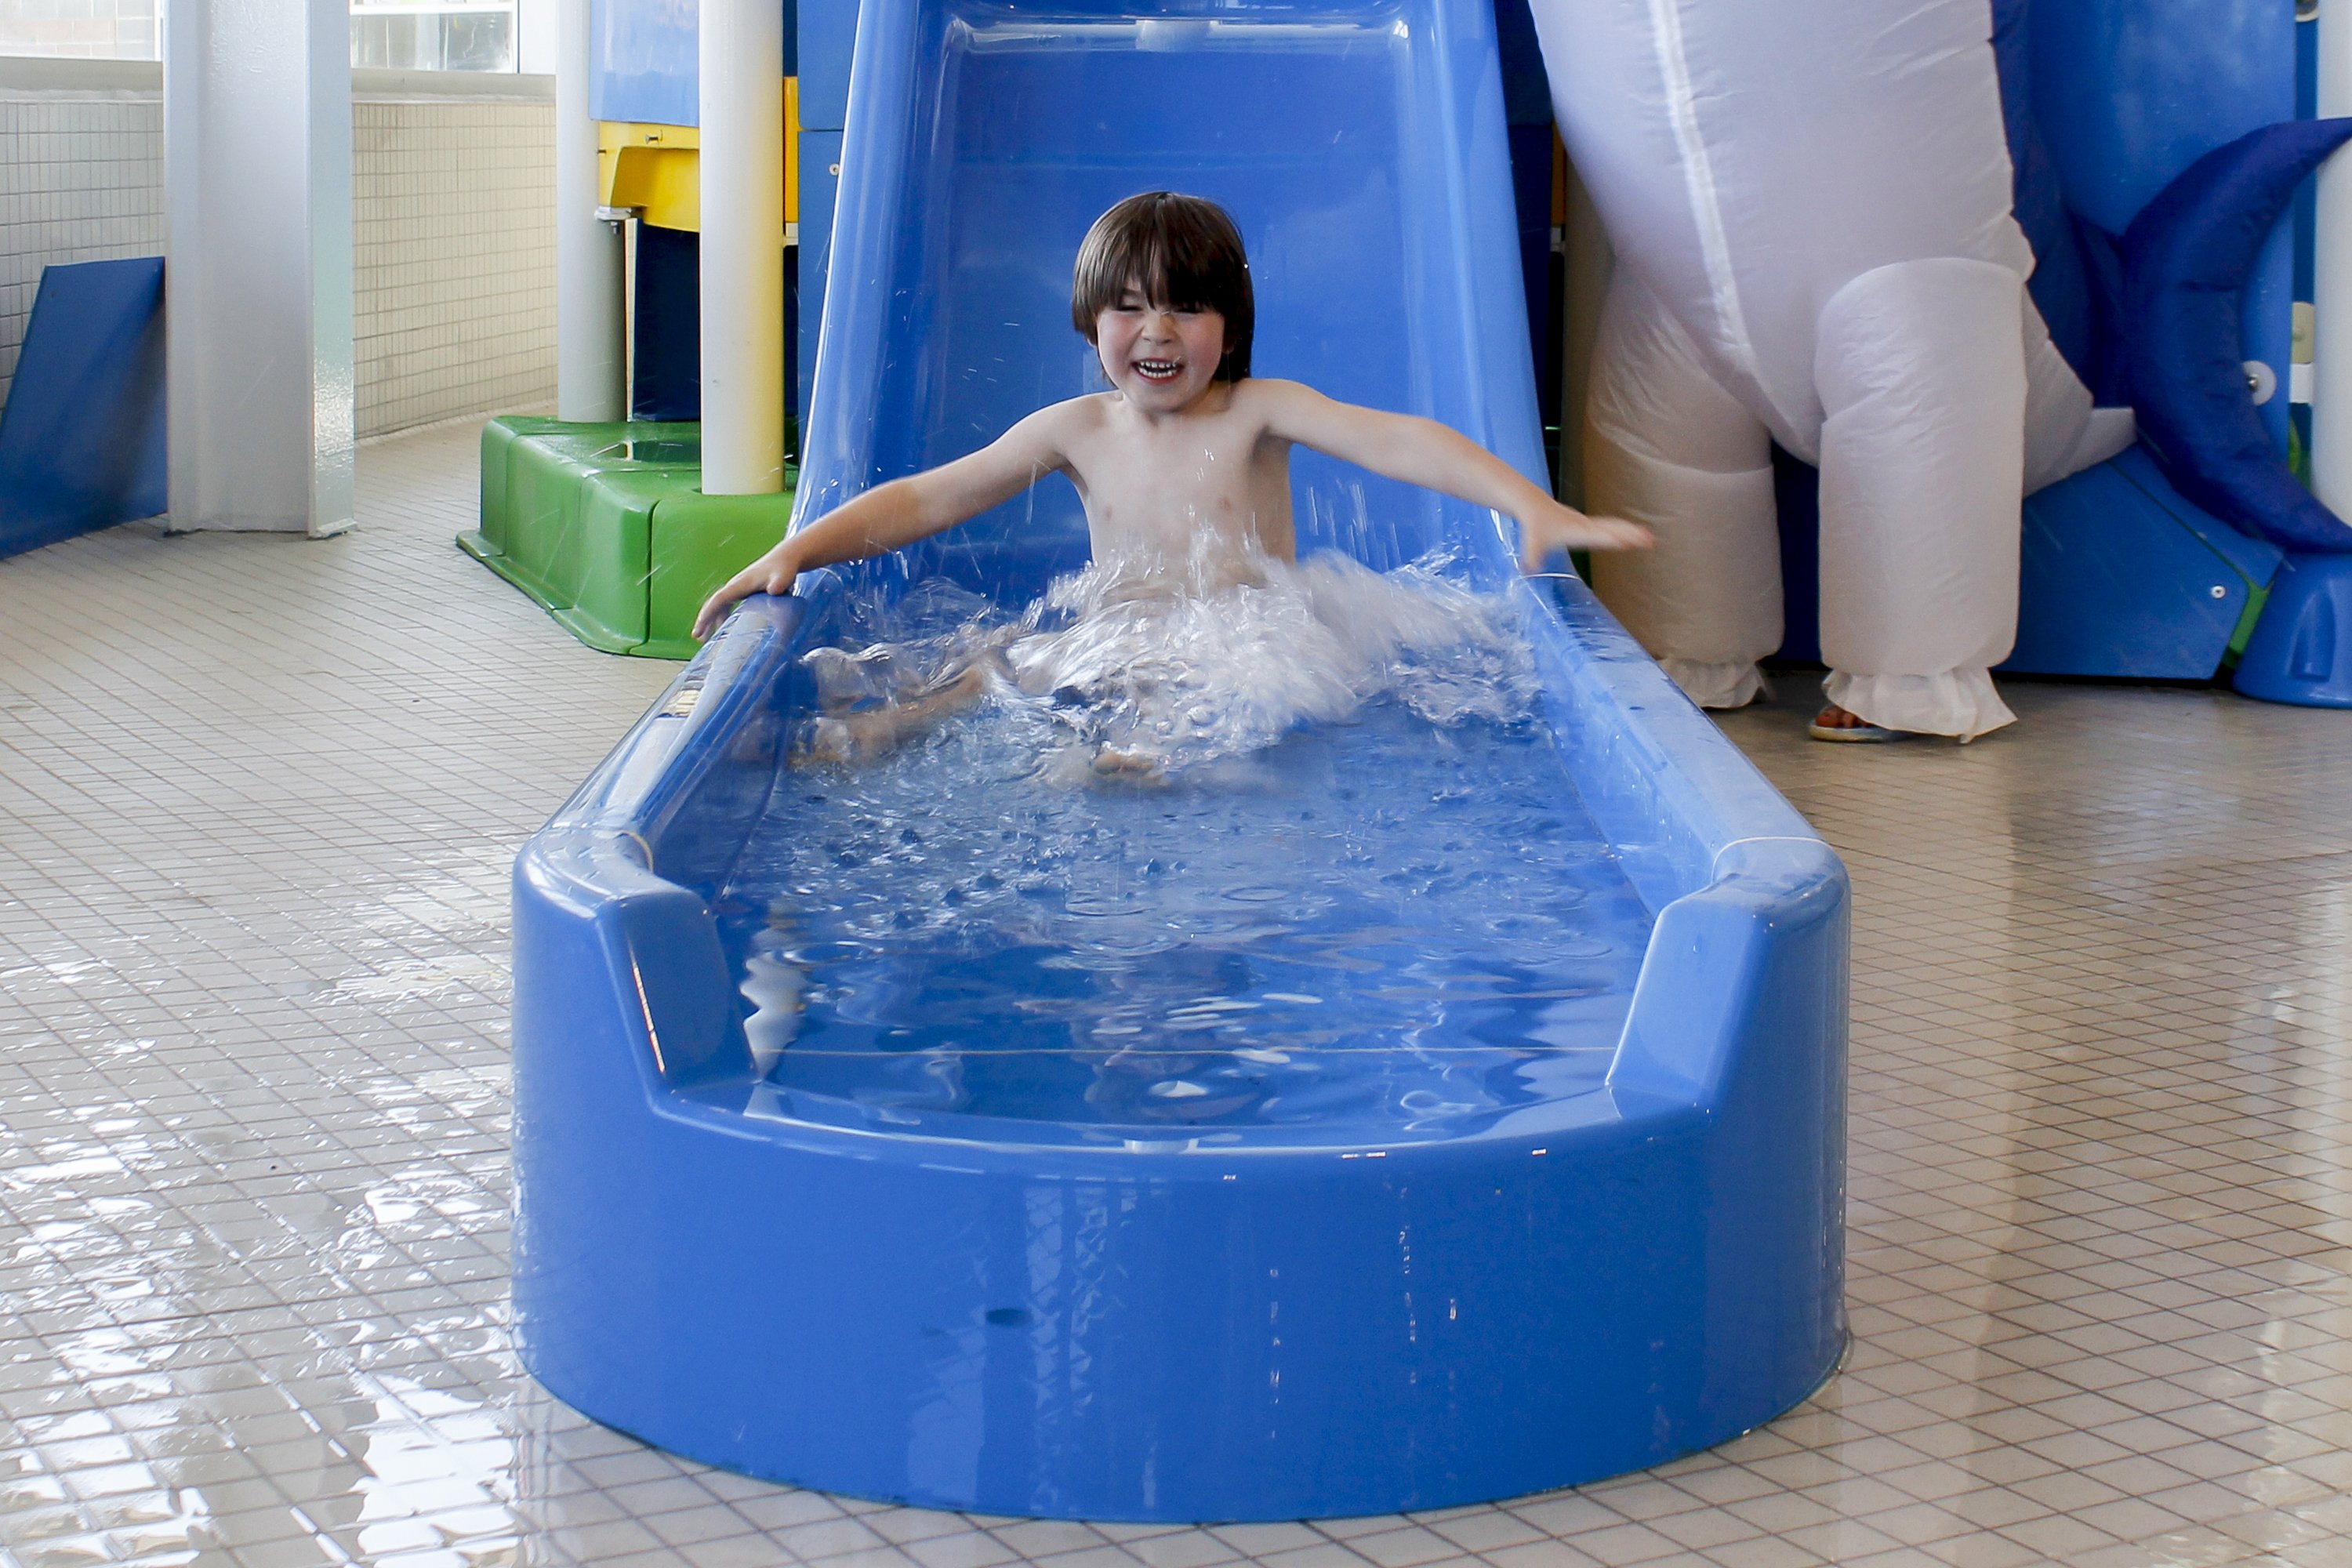 A child splashes down a blue water slide